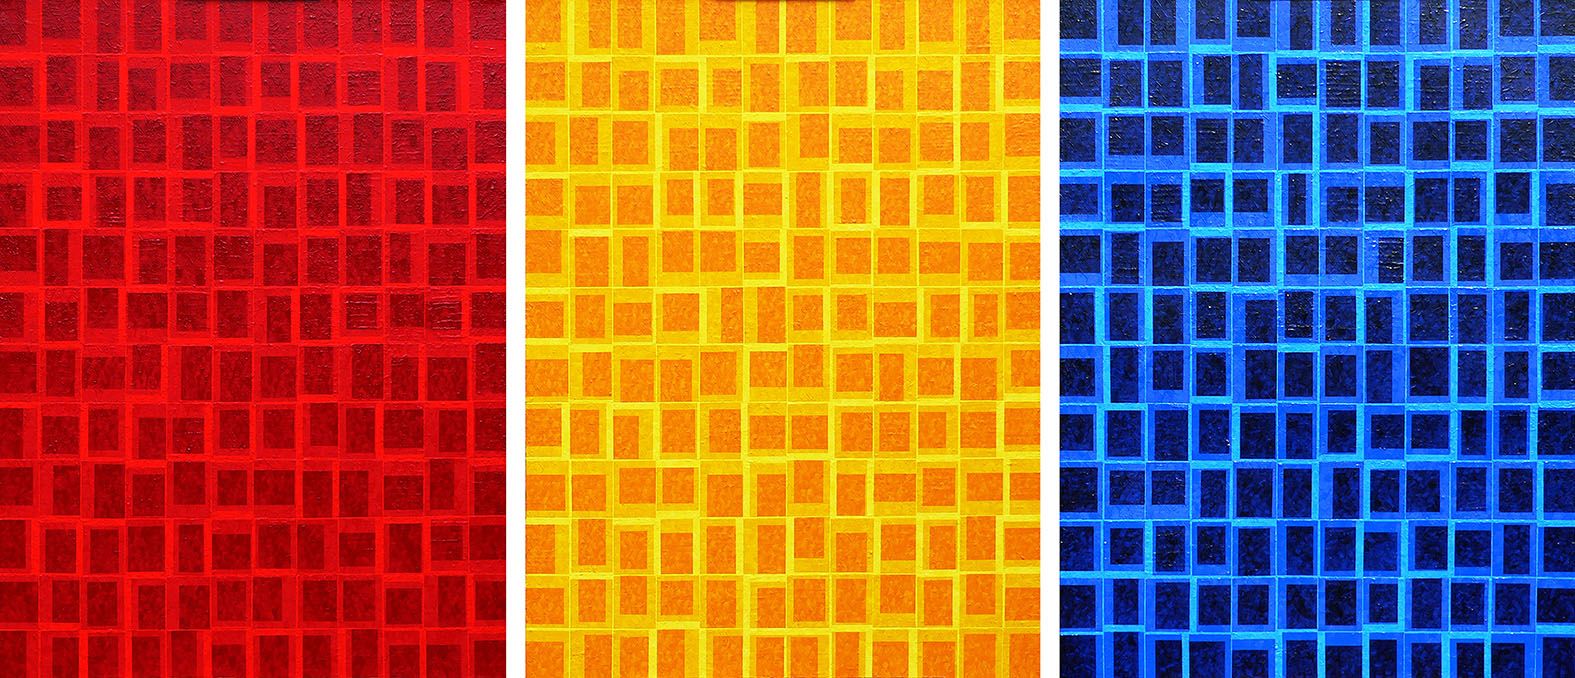 Primary One, oil on canvas, 121 x 175cm, 2014